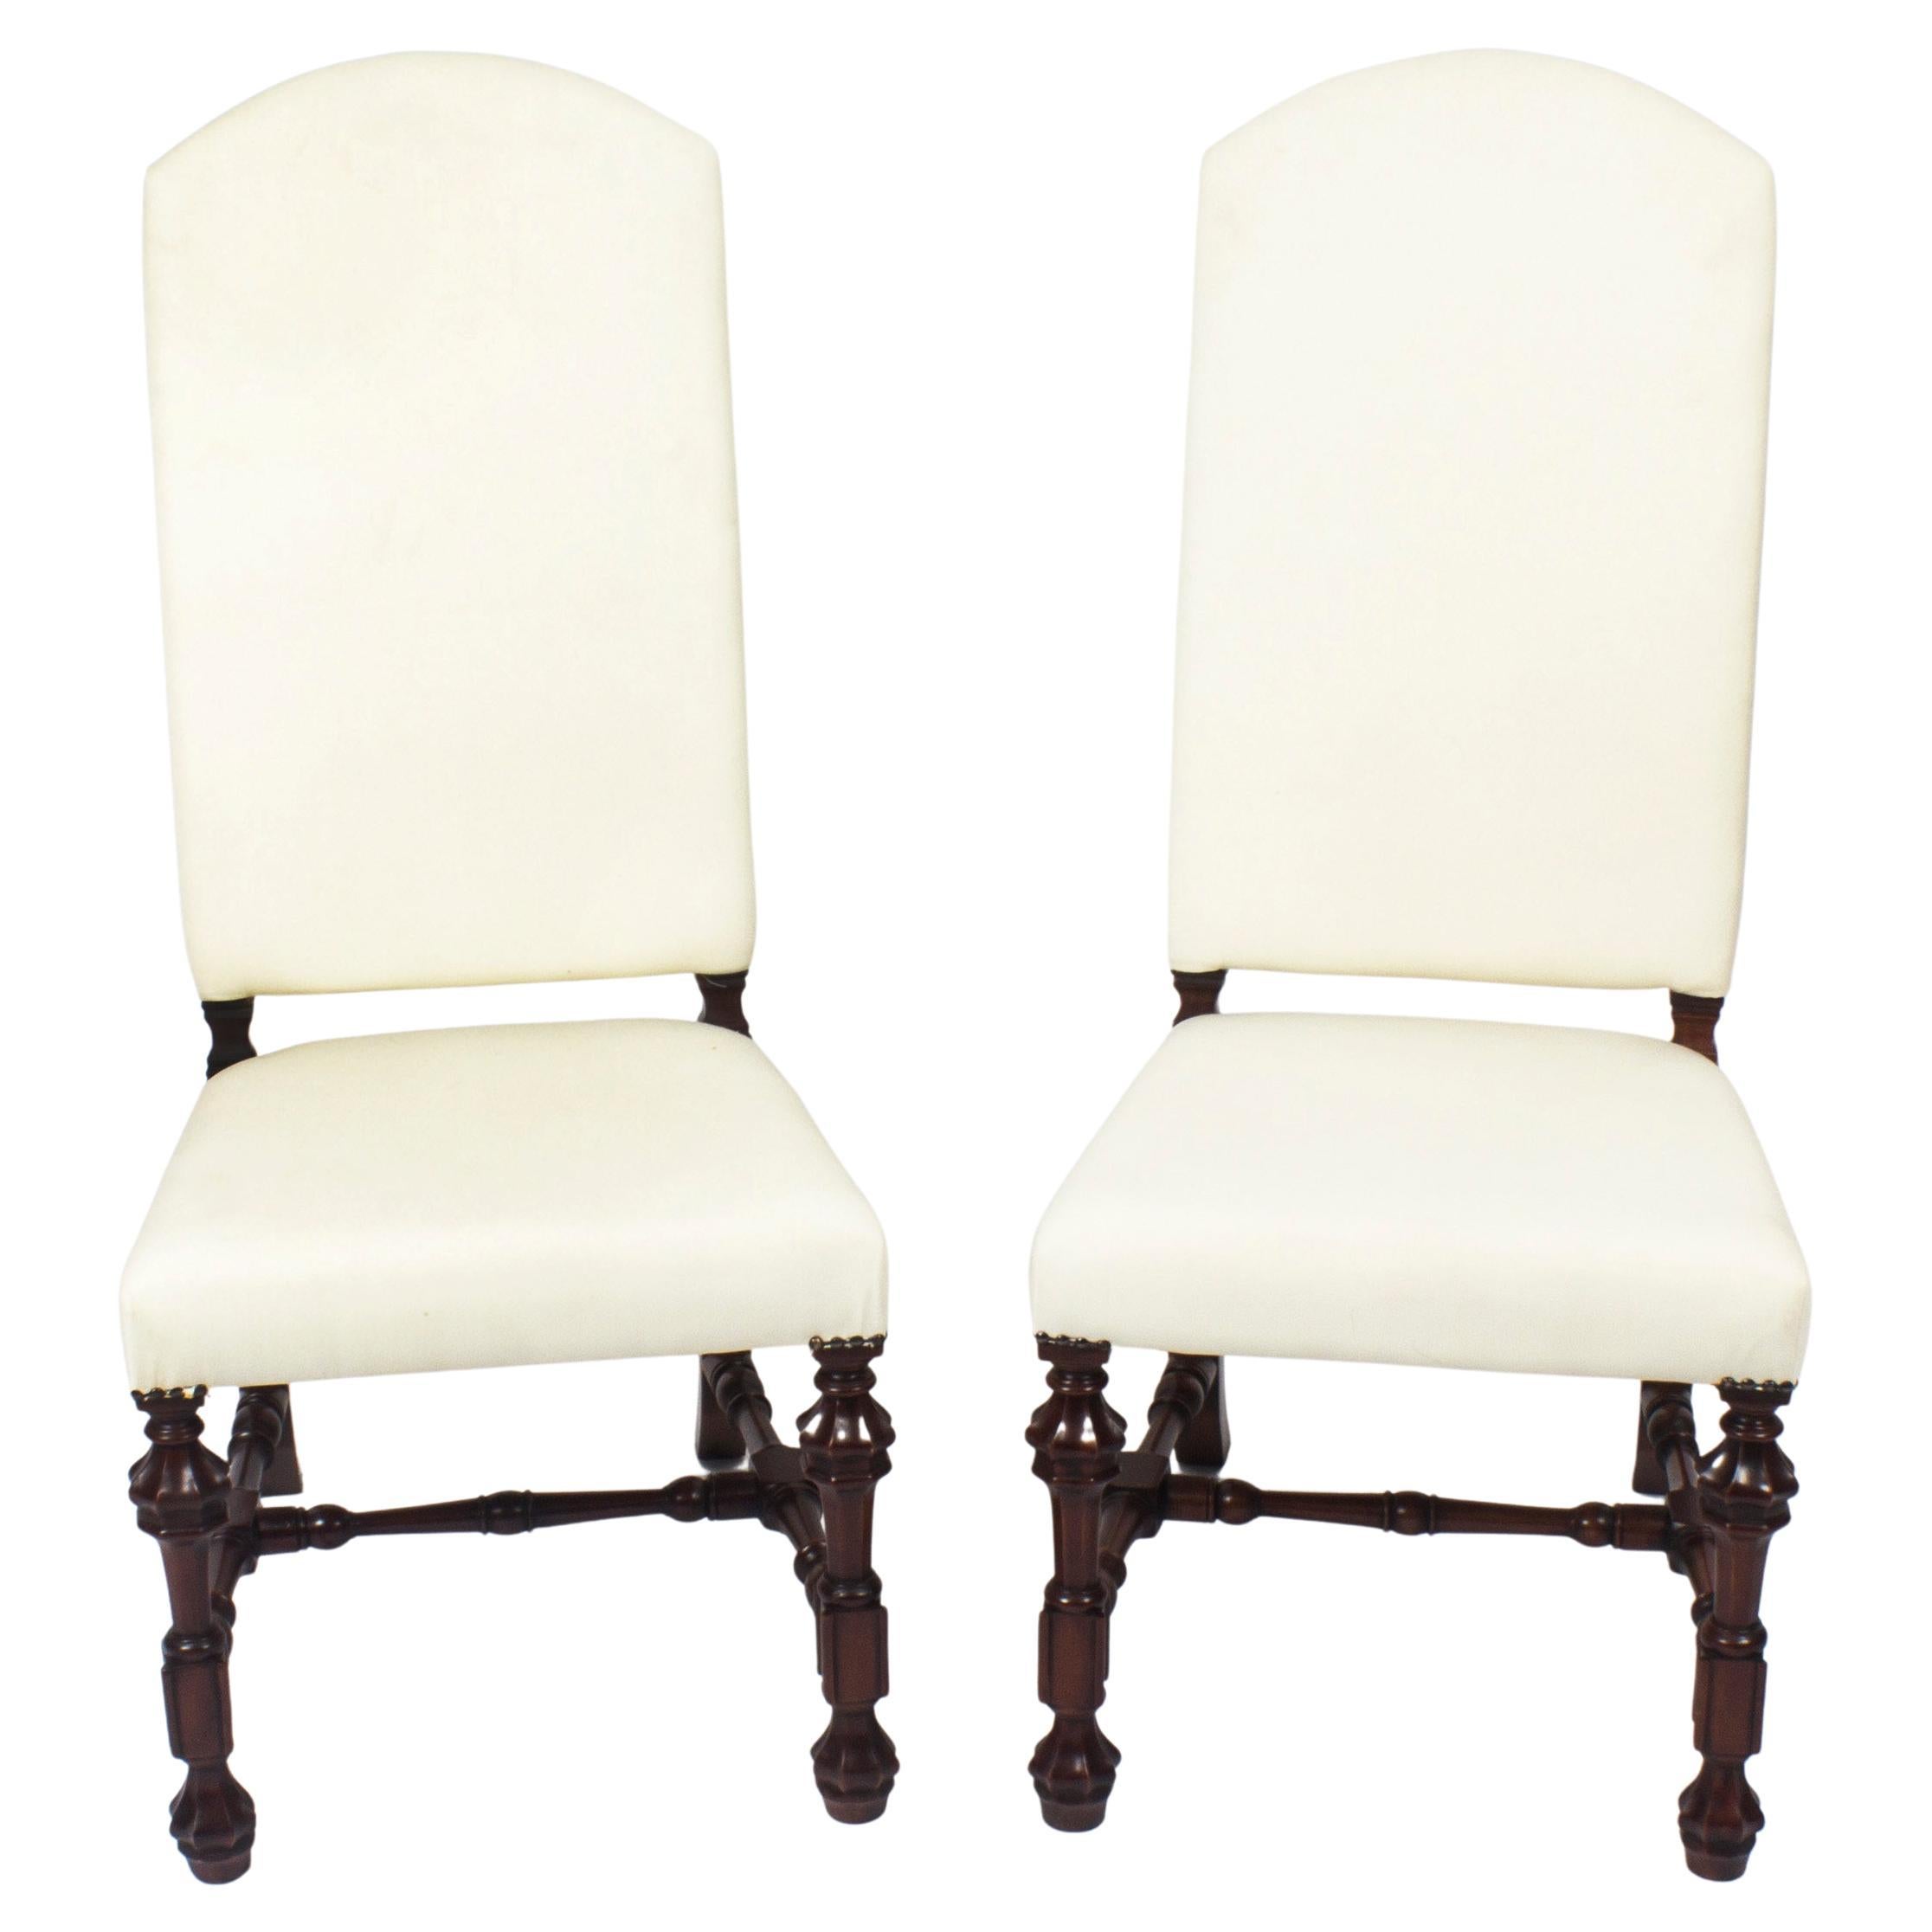 Vintage Pair of Carolean Style Upholstered High Back Dining Chairs, 20th Century